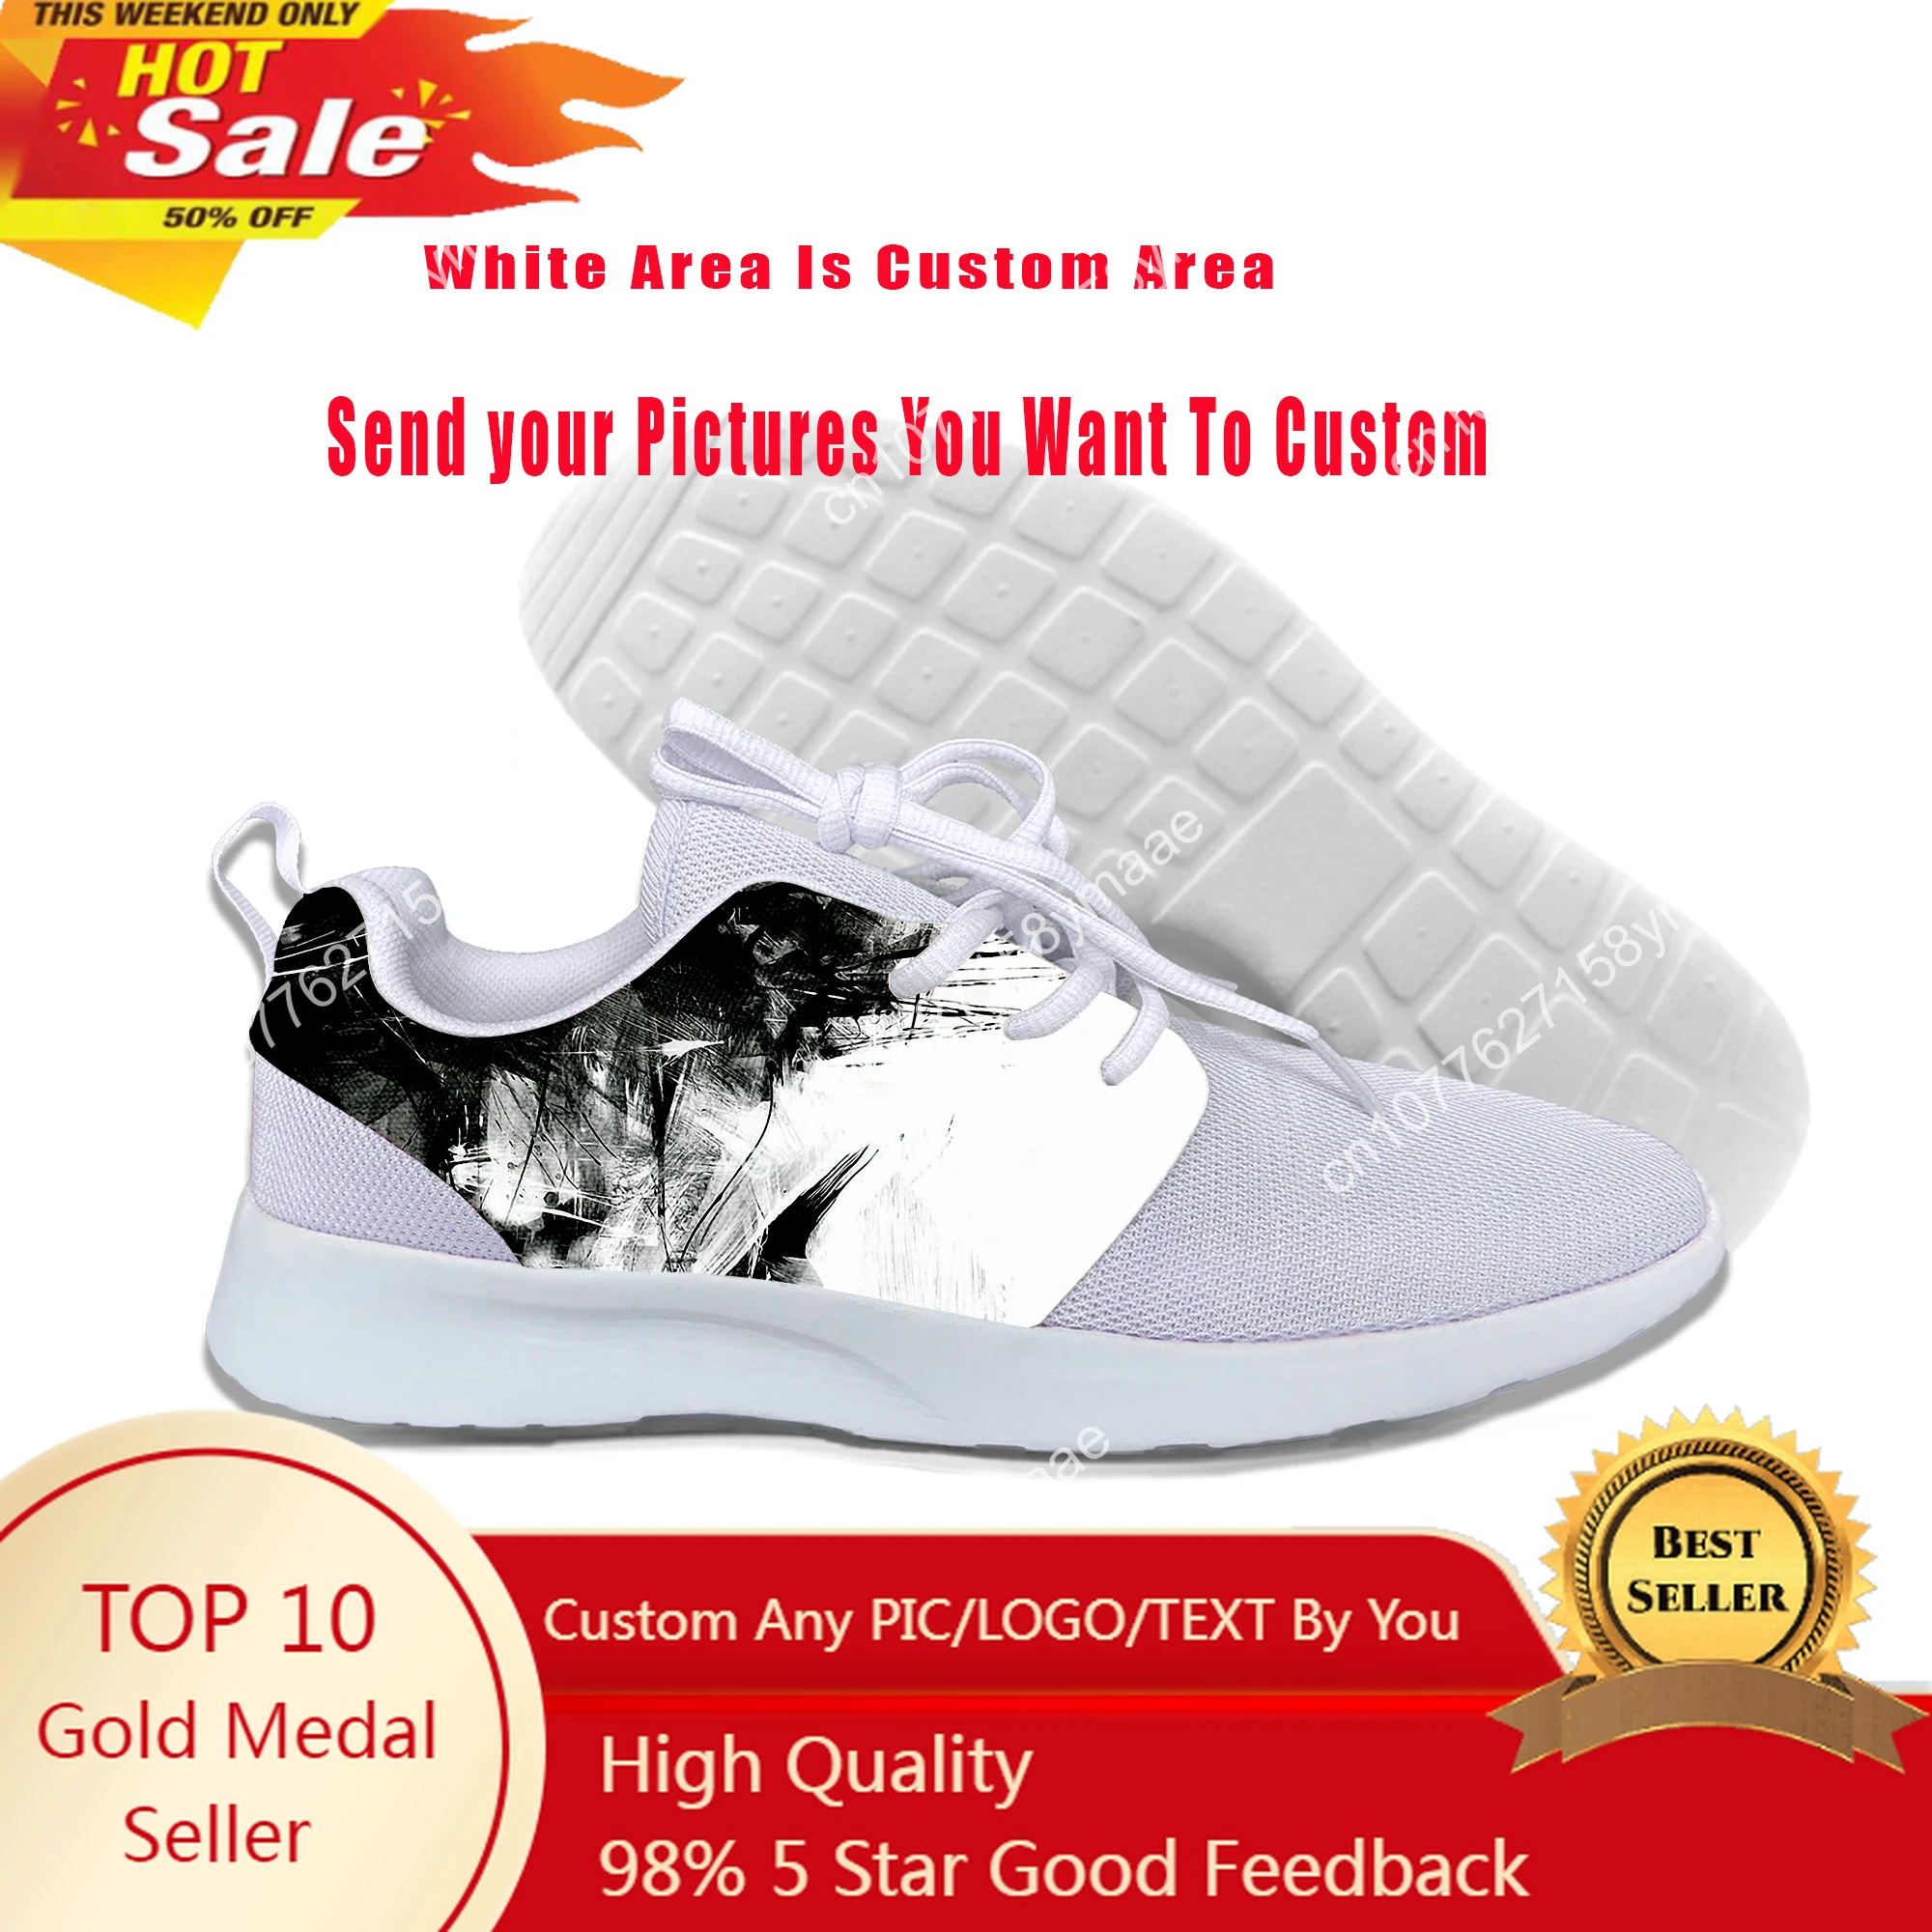 Hot Cool Splashed Paint Casual Shoes Summer Shoes Men Short Printed 3D Sneakers Lightweight Running Shoes Classic Sports Shoes hot summer new men women fashion sweatshirt miley cyrus shoes lightweight leisure running shoes breathable sports shoes sneakers